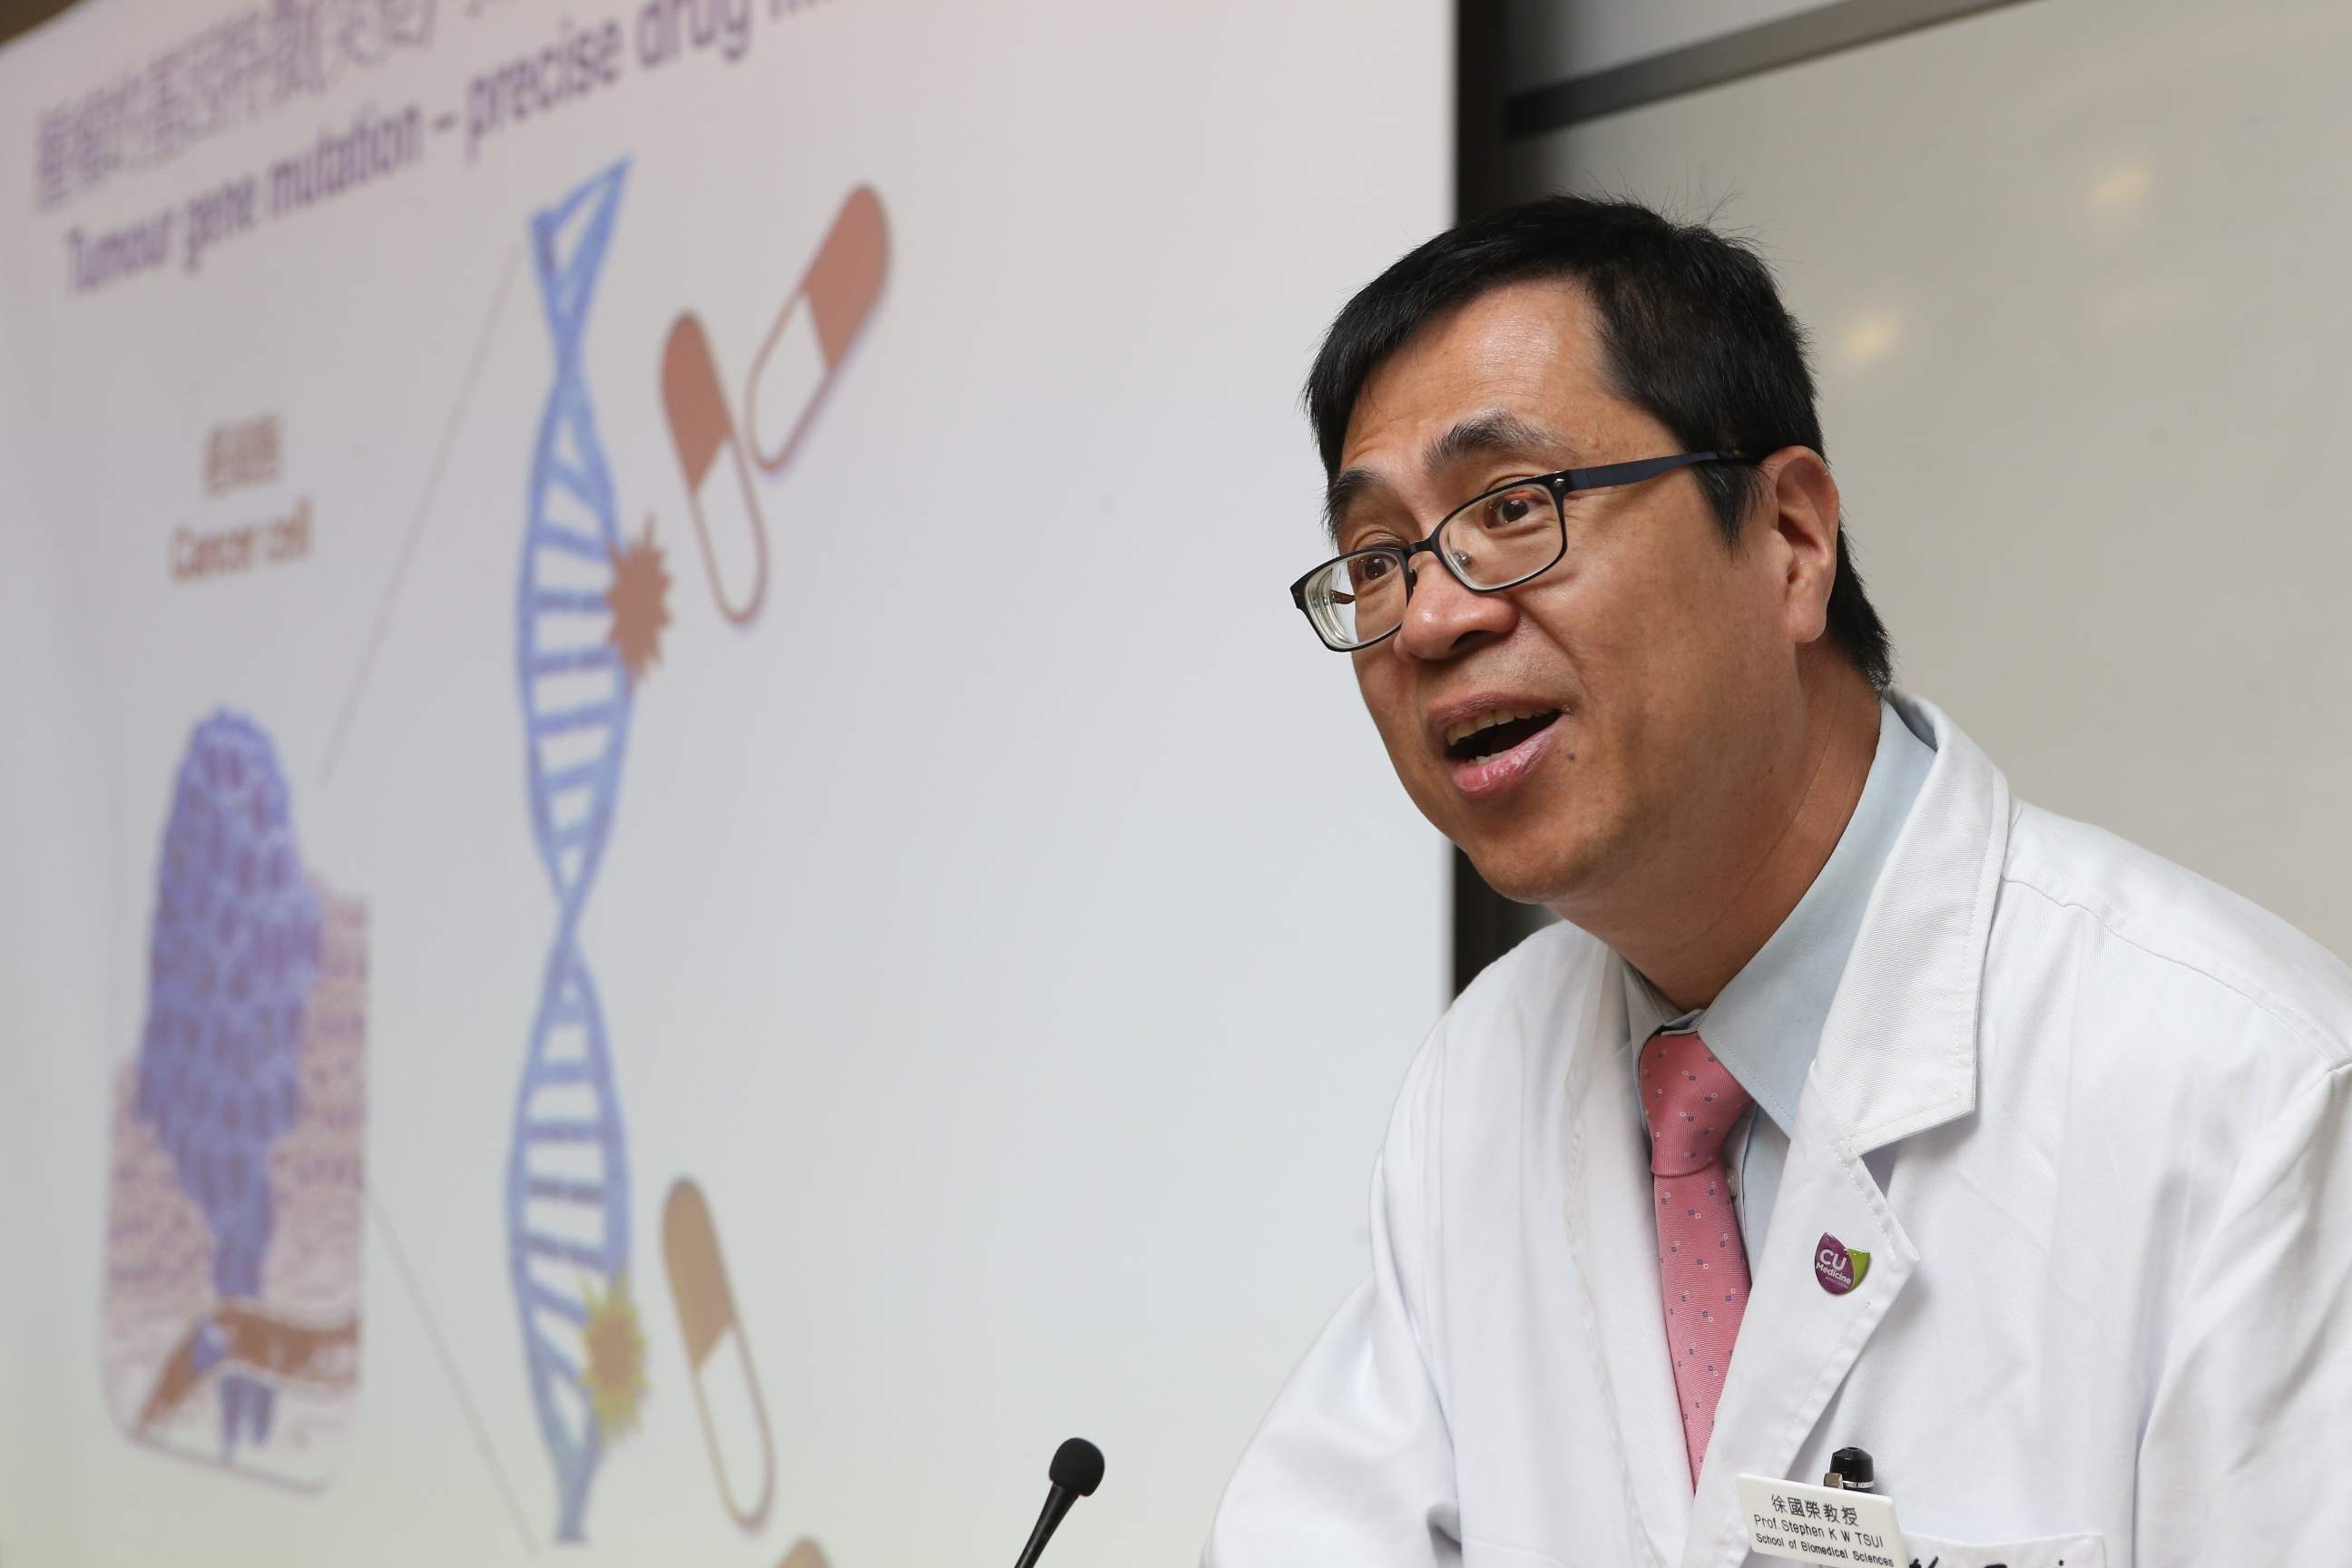 Professor TSUI says CUHK's ‘Next-Generation Sequencing’ technology can perform multi-gene sequencing very quickly and accurately with only small amounts of tumour DNA samples.